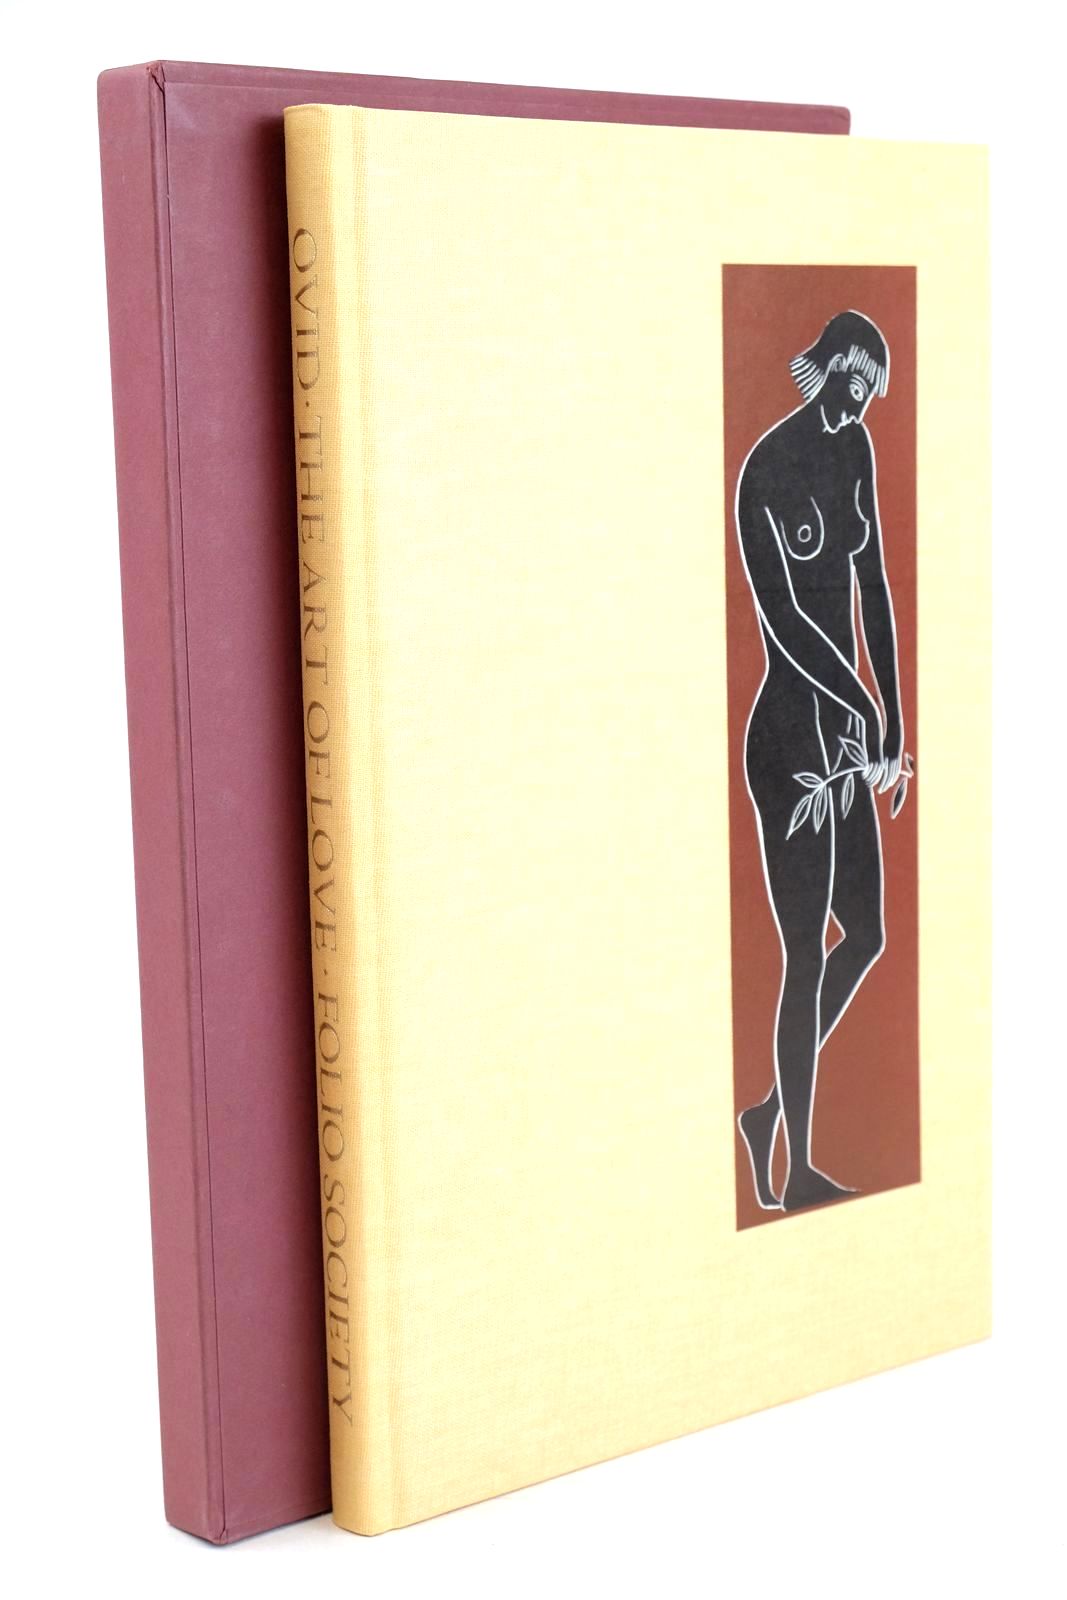 Photo of THE ART OF LOVE written by Ovid,  Naso, Publius Ovidius Michie, James illustrated by Baker, Grahame published by Folio Society (STOCK CODE: 1325547)  for sale by Stella & Rose's Books